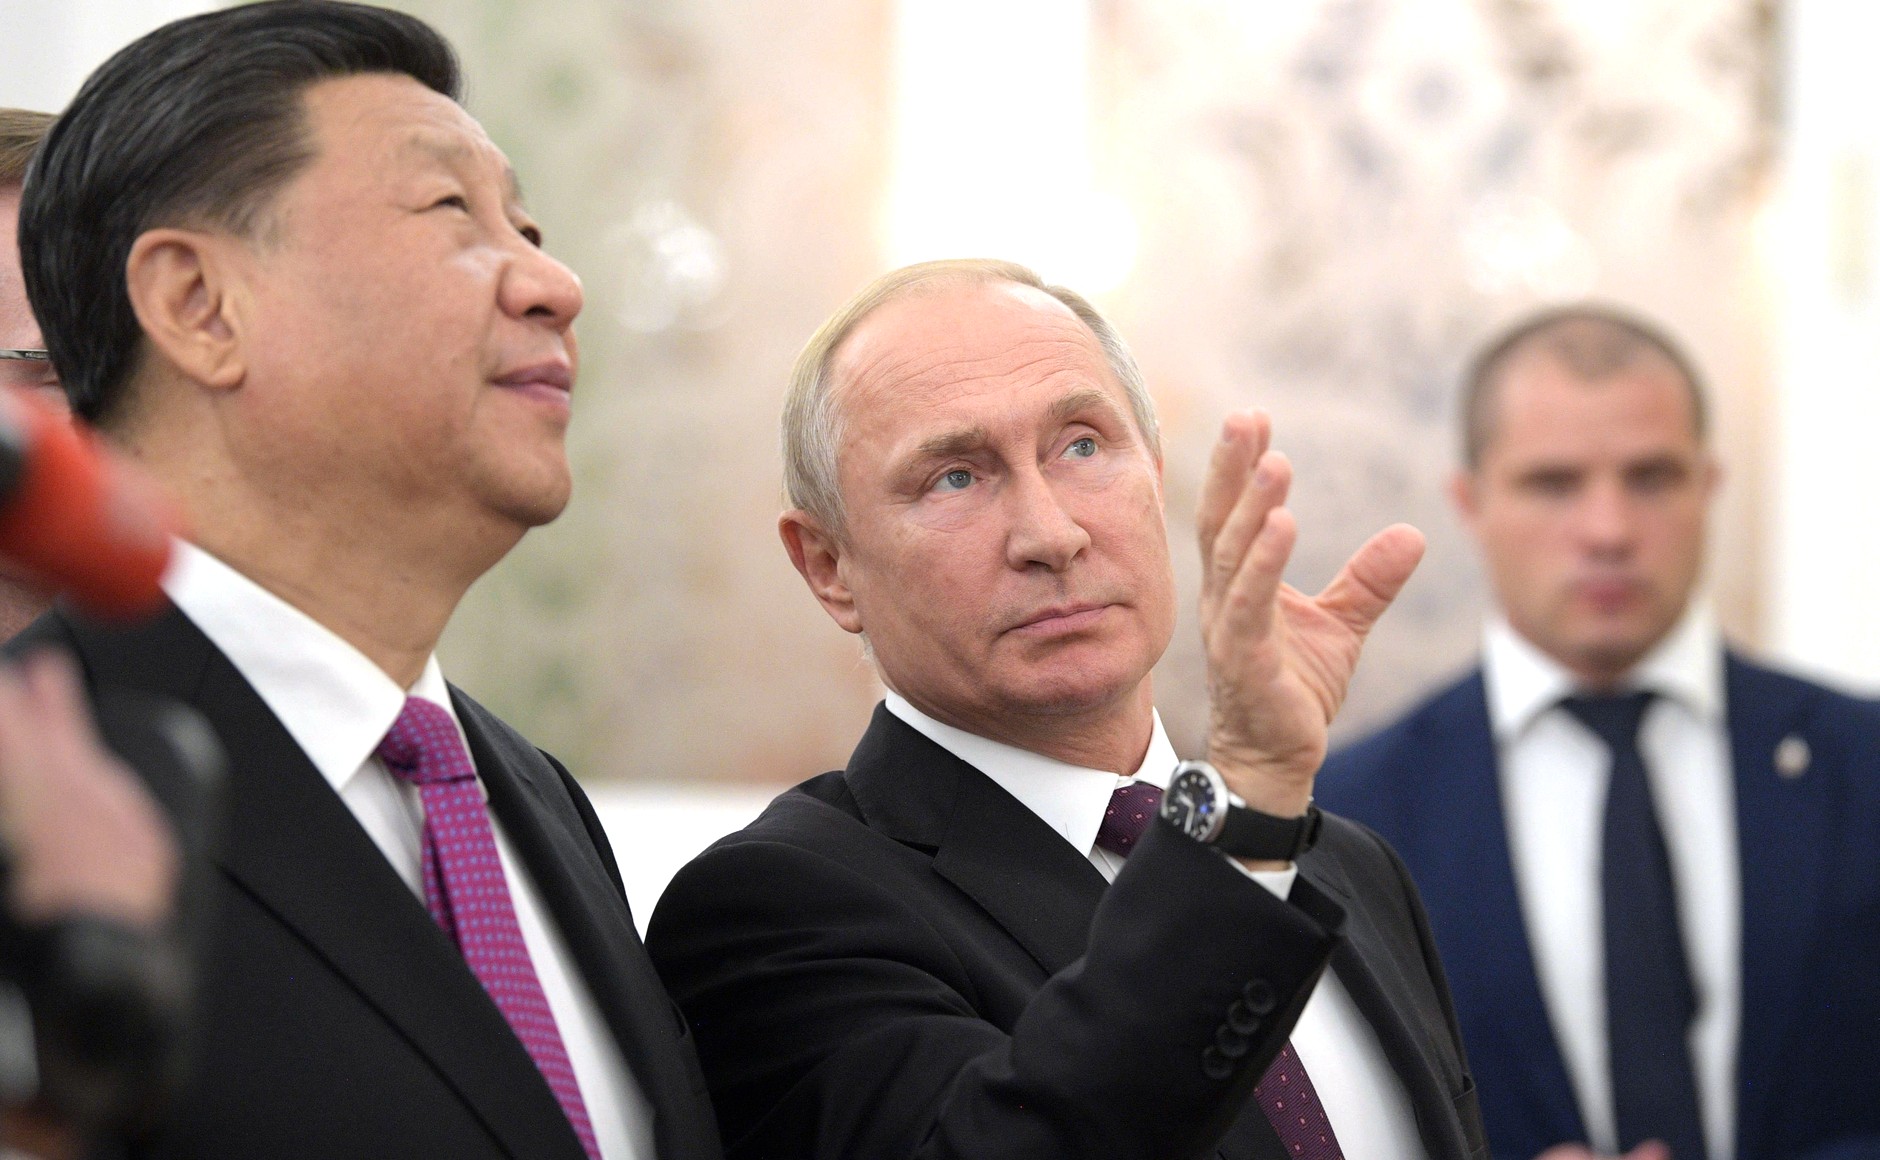 Putin and Xi meeting and looking to the future